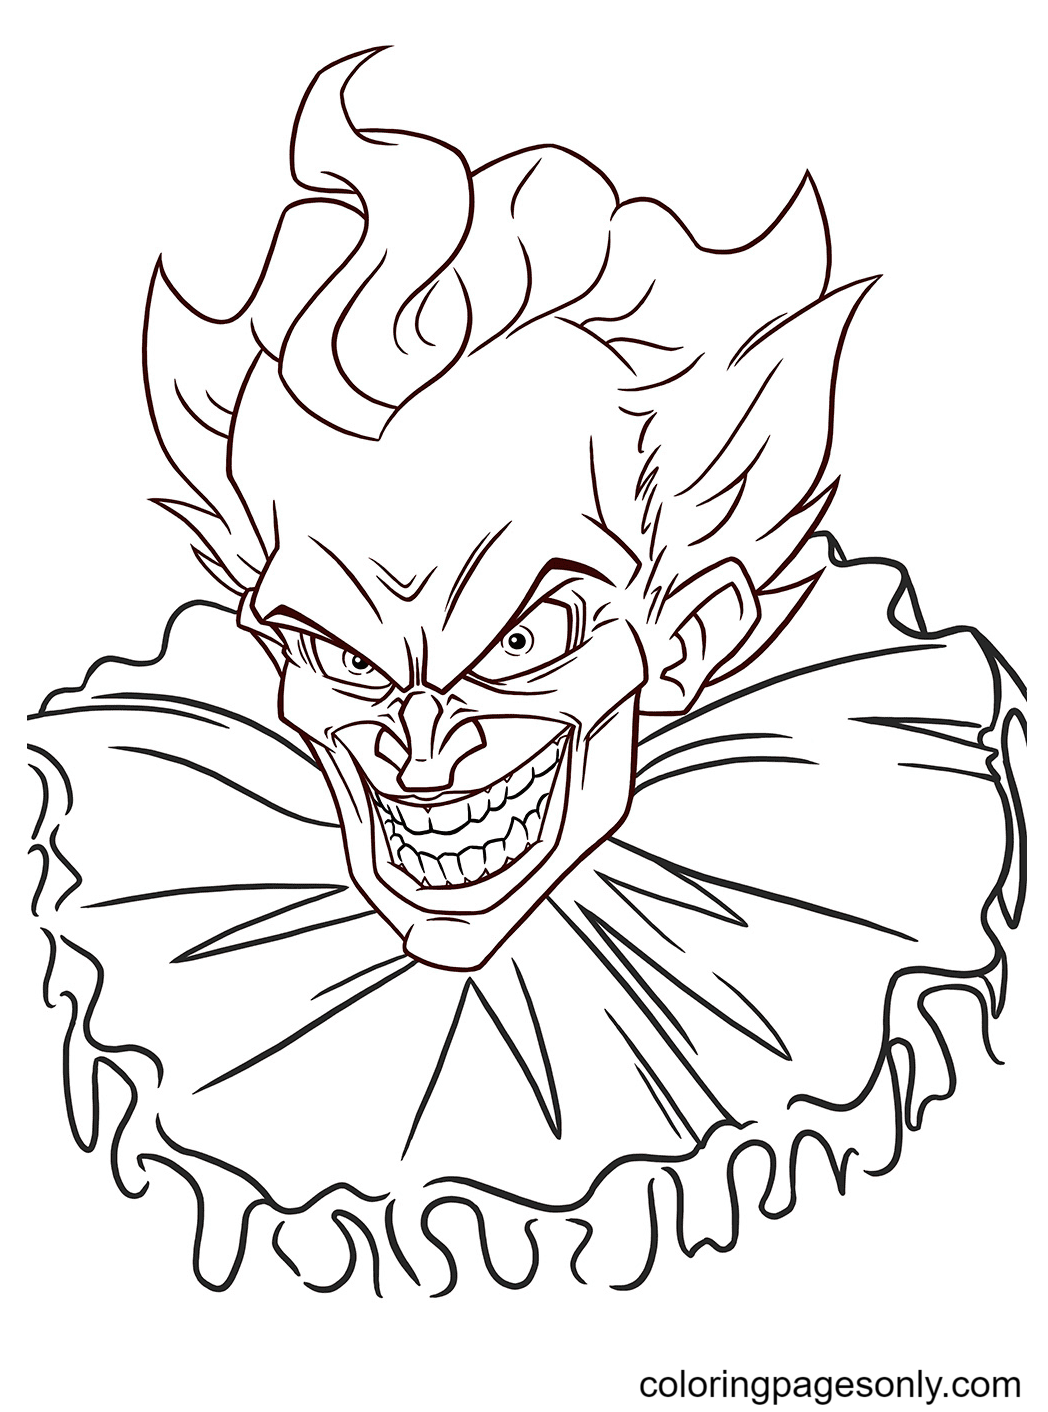 Clown Pennywise Printable Coloring Pages